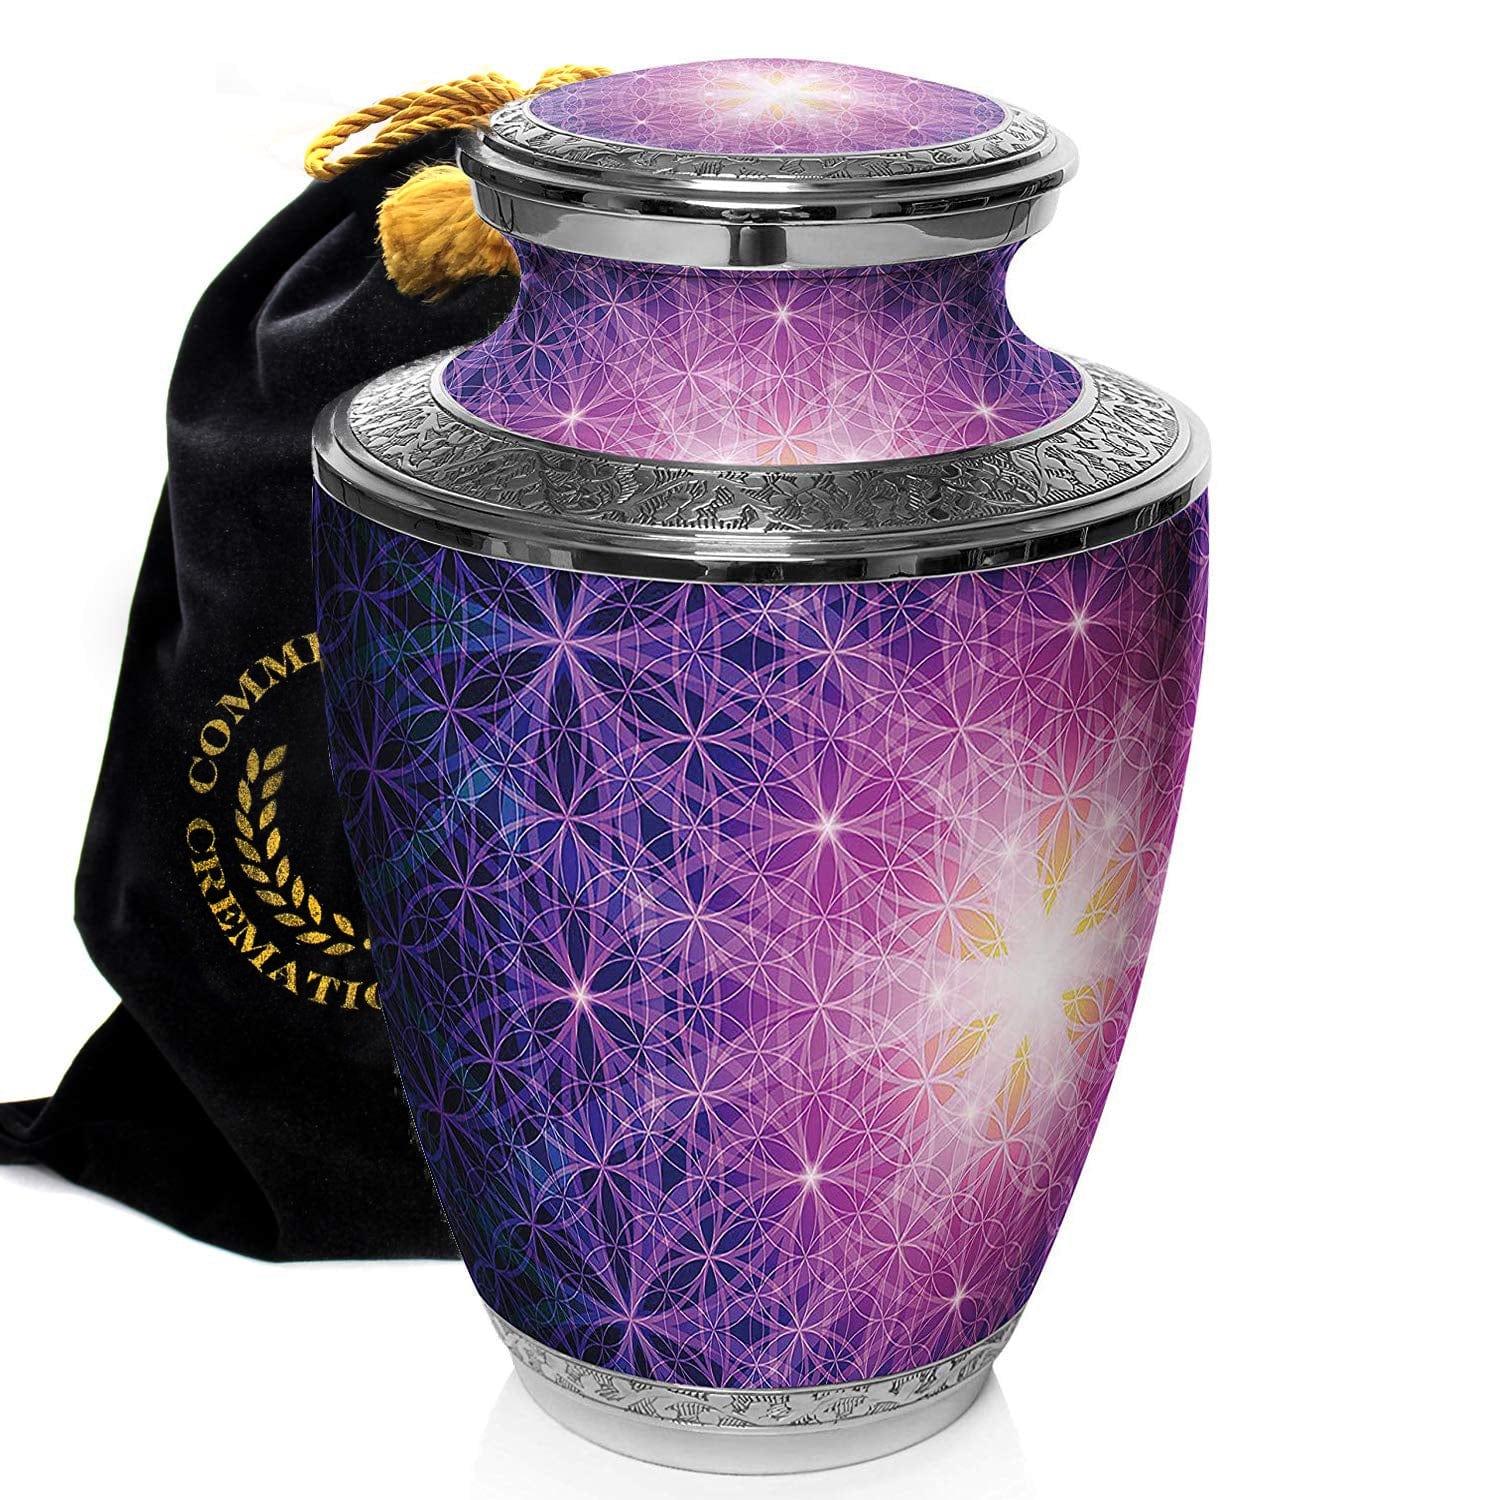 Commemorative Cremation Urns Home & Garden Seed of Life Geometric Cremation Urn